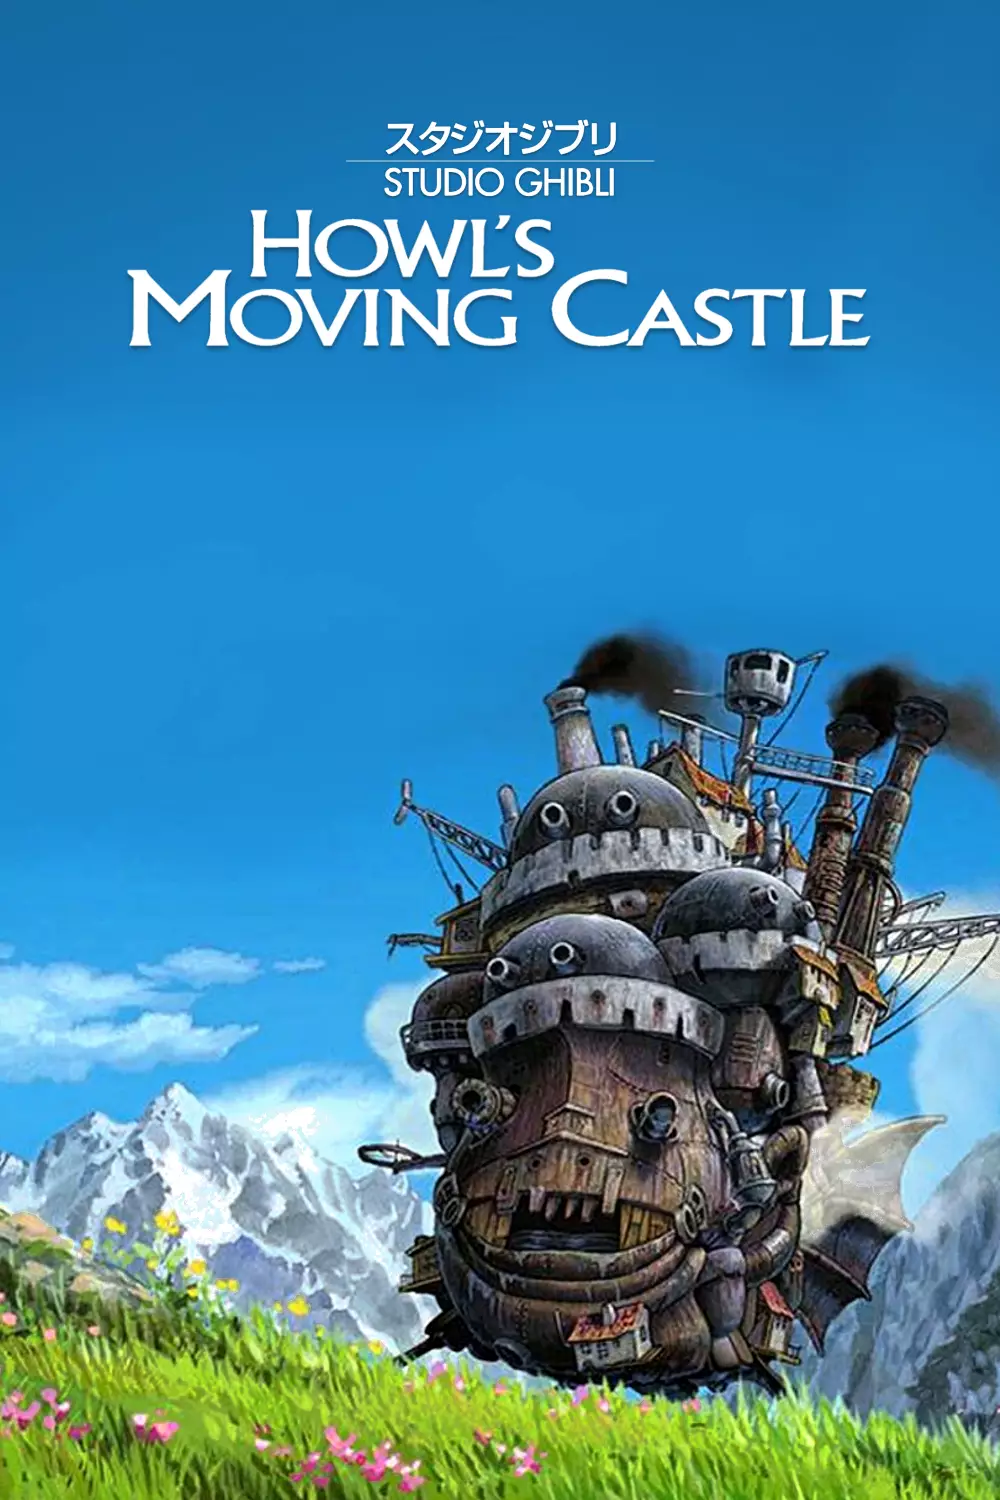 The studio released Howl's Moving Castle in 2004.